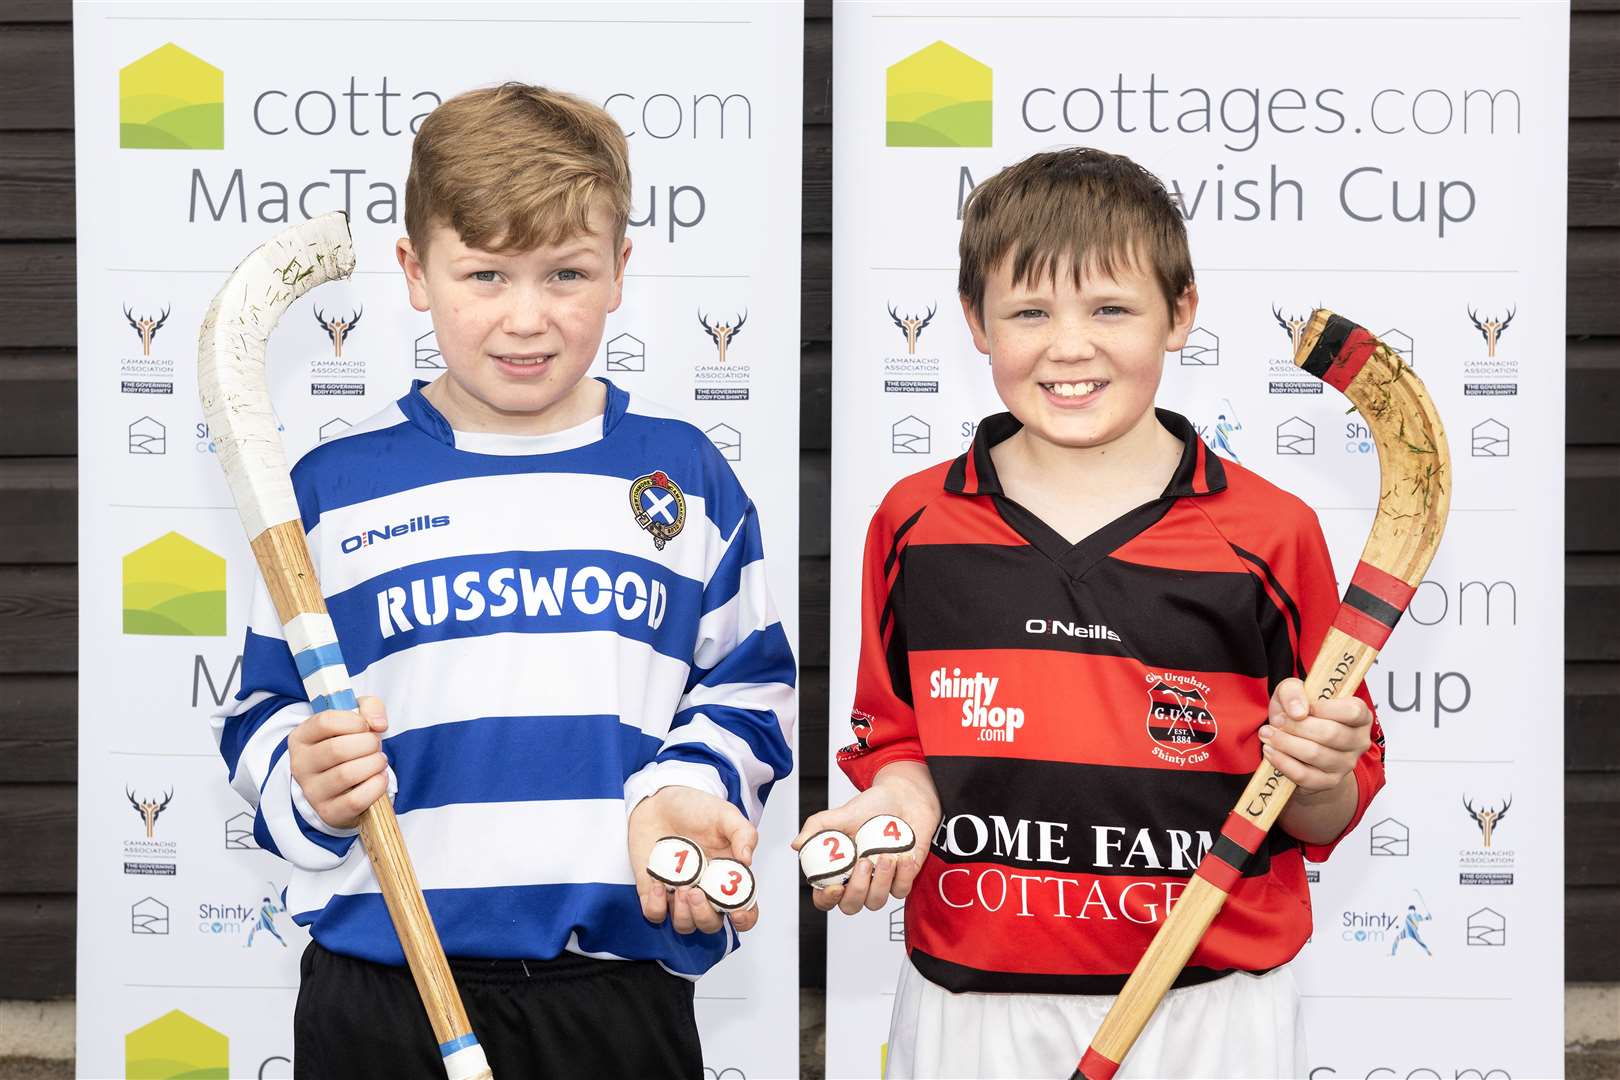 Making the draw were Lewis MacKintosh from Newtonmore Primary School and Alfie MacLeod, of Glenurquhart Primary School. Lewis’s father, Glen, and Alfie's father Iain are both previous winners of the MacTavish Cup.